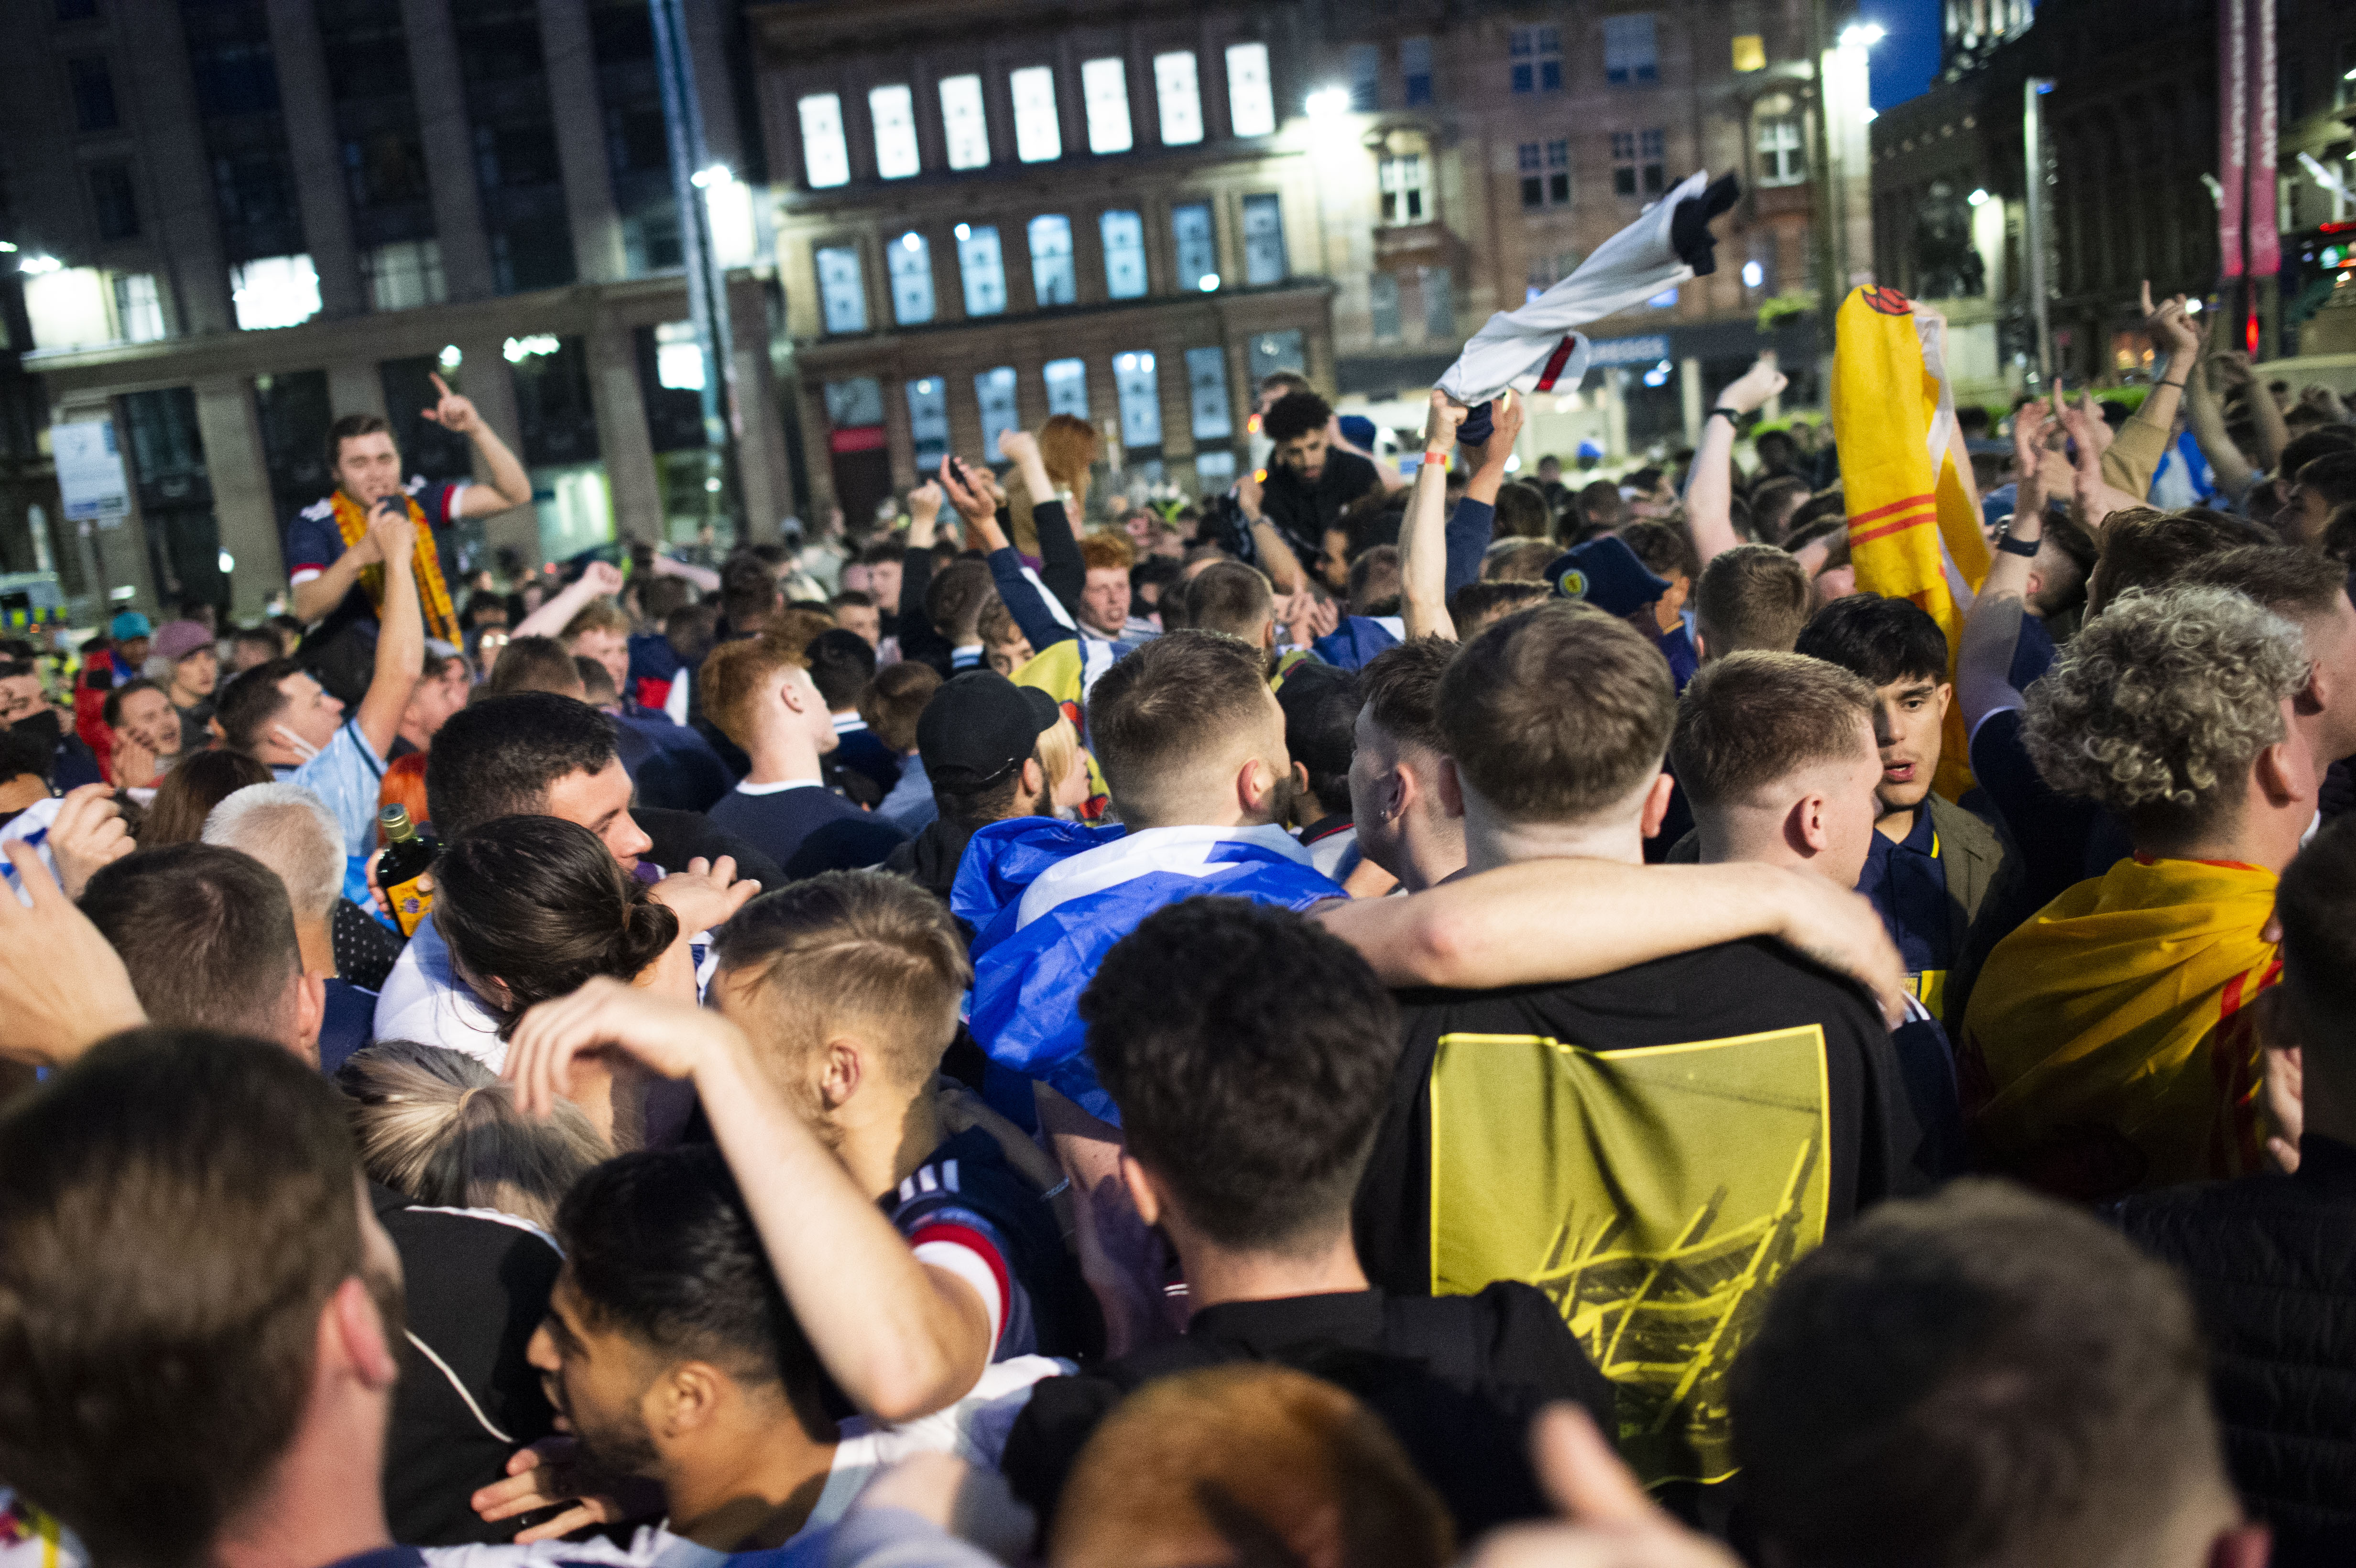 Scotland didn't reach the knockouts stages, but that didn't stop the party in George Square.